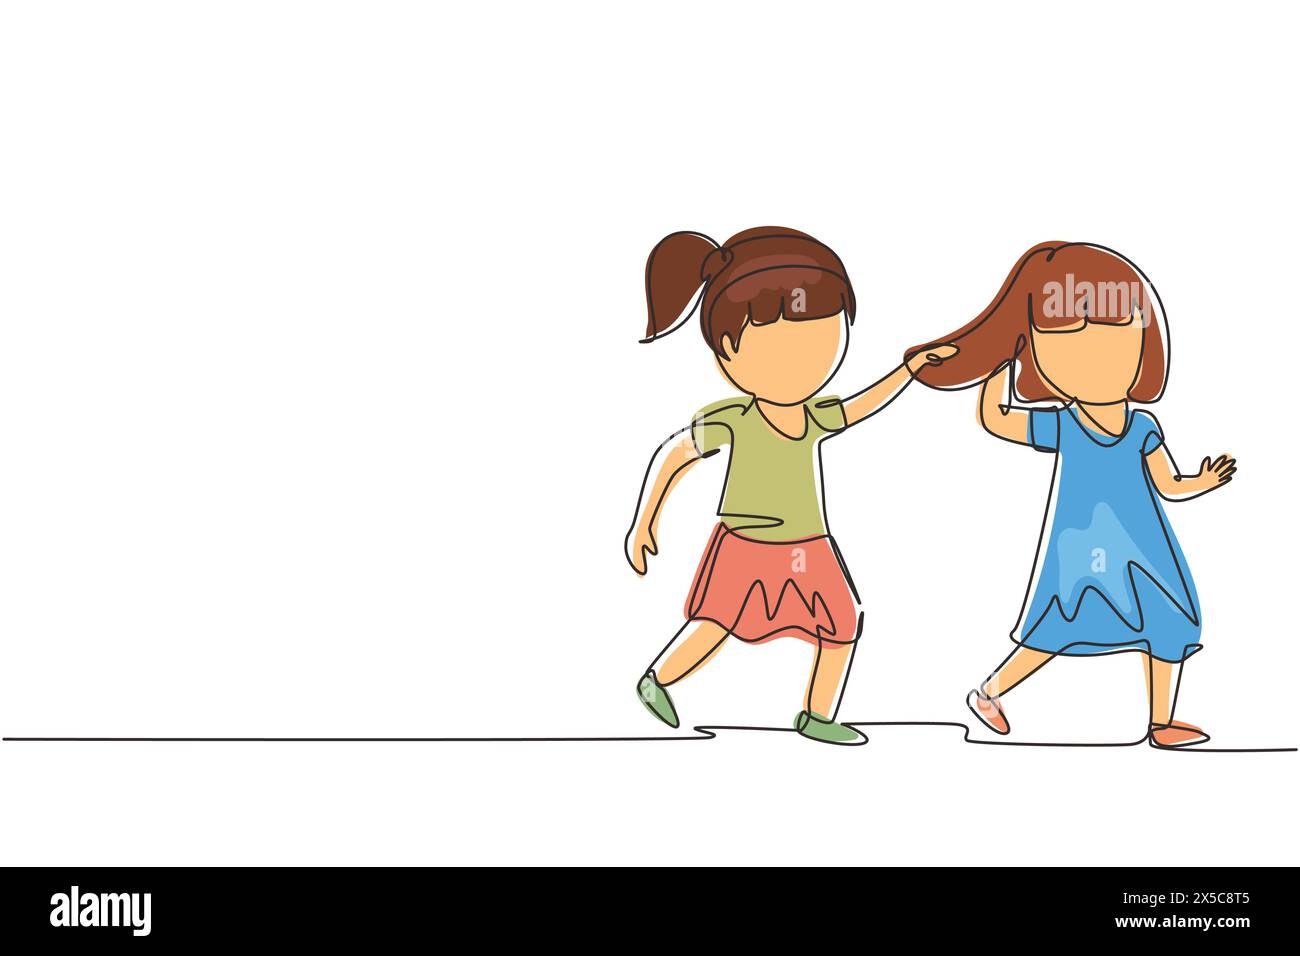 Single continuous line drawing toddler kids girls fighting with one pulling hair of the other. She look of shock and pain. Problem of physical bullyin Stock Vector